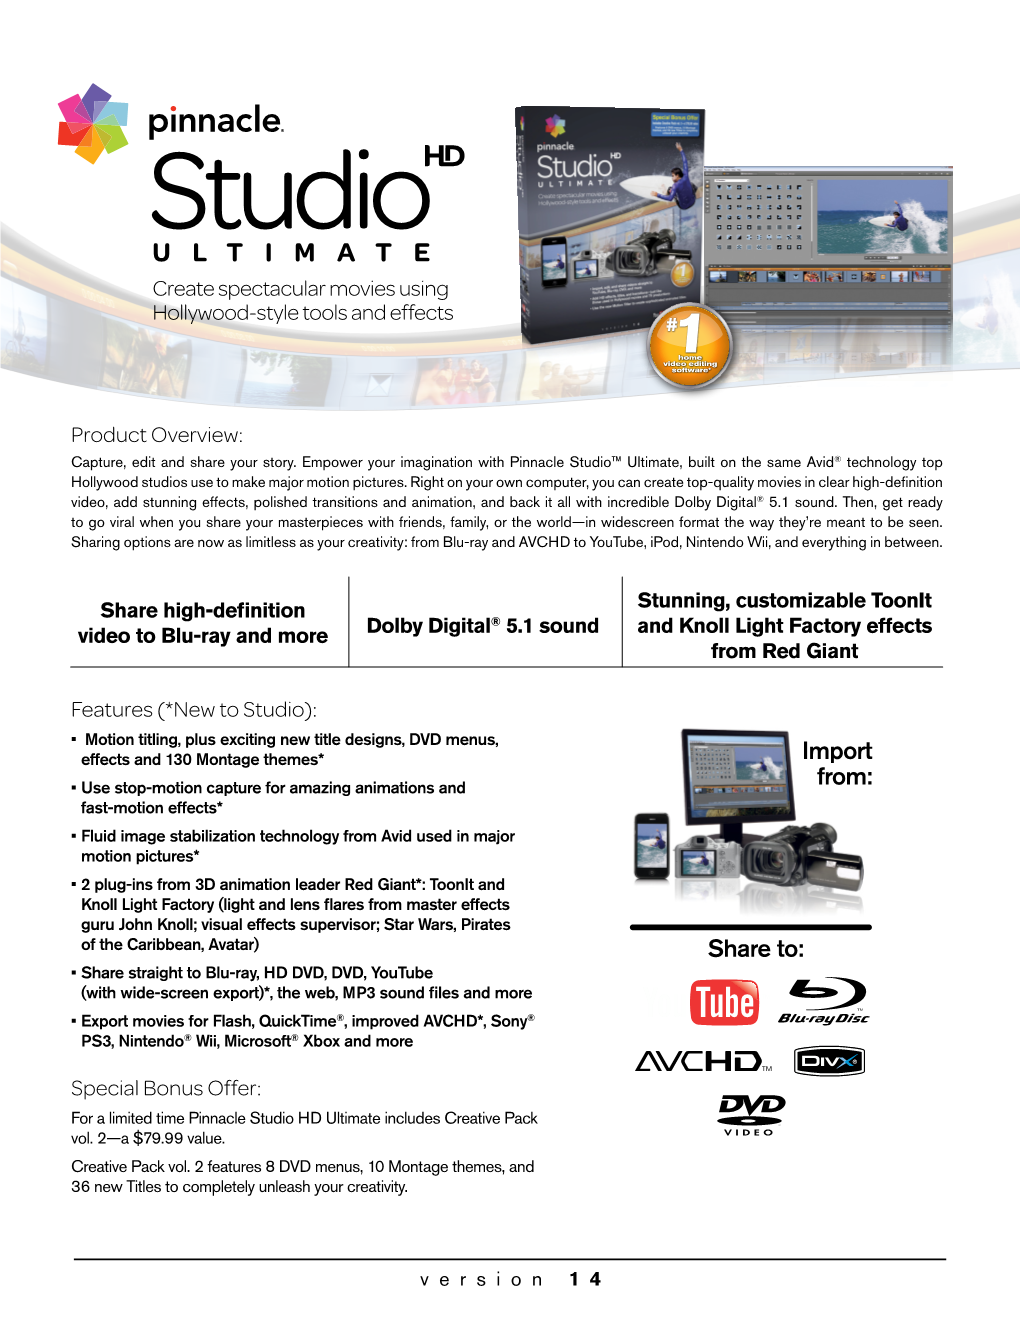 Product Overview: Features (*New to Studio): Special Bonus Offer